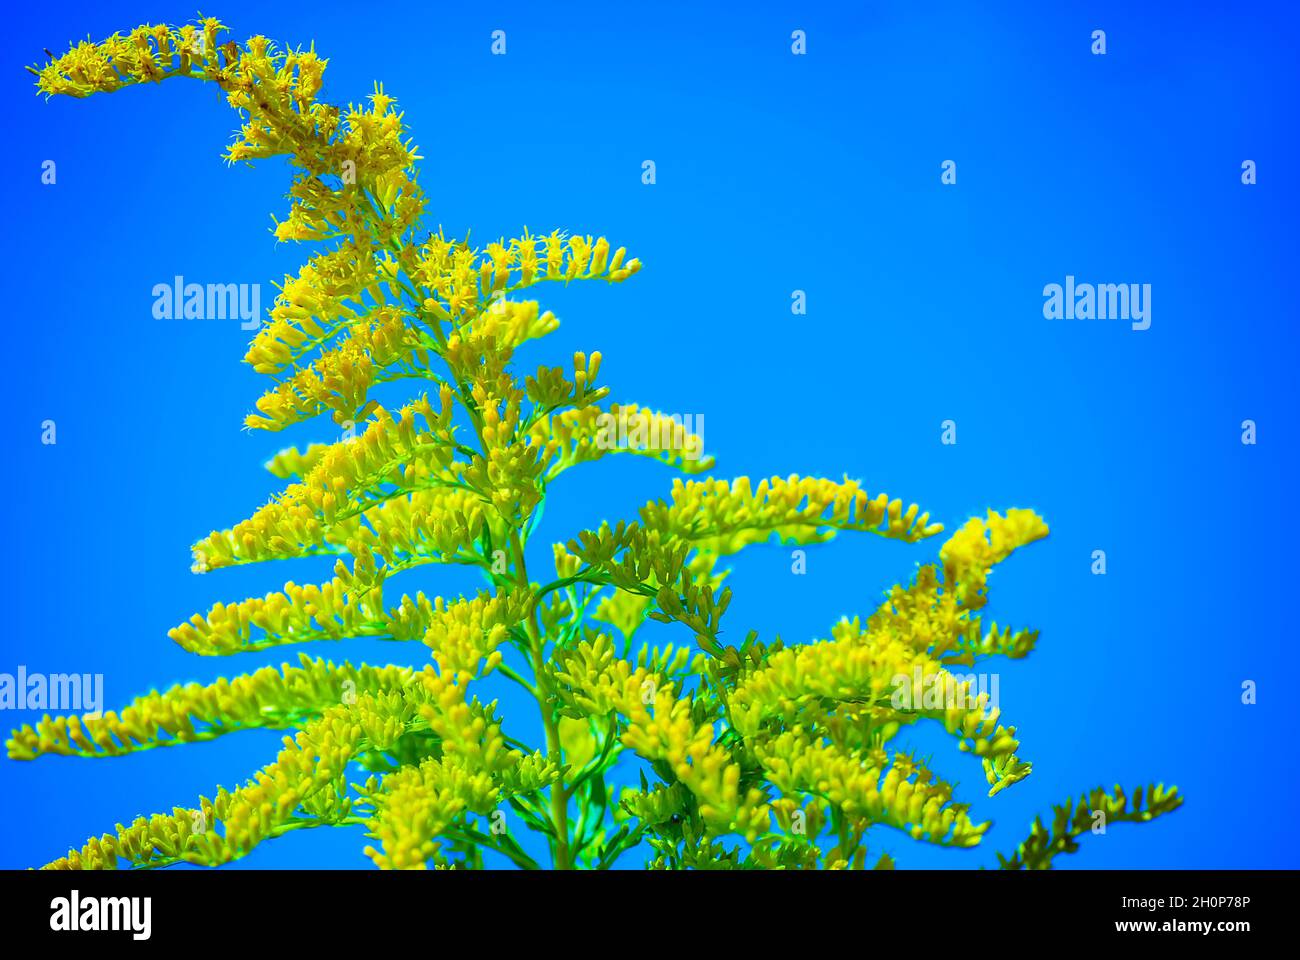 Goldenrod (Solidago) grows wild, Oct. 1, 2010, in Fairhope, Alabama. The native wildflower grows to approximately five feet tall. Stock Photo